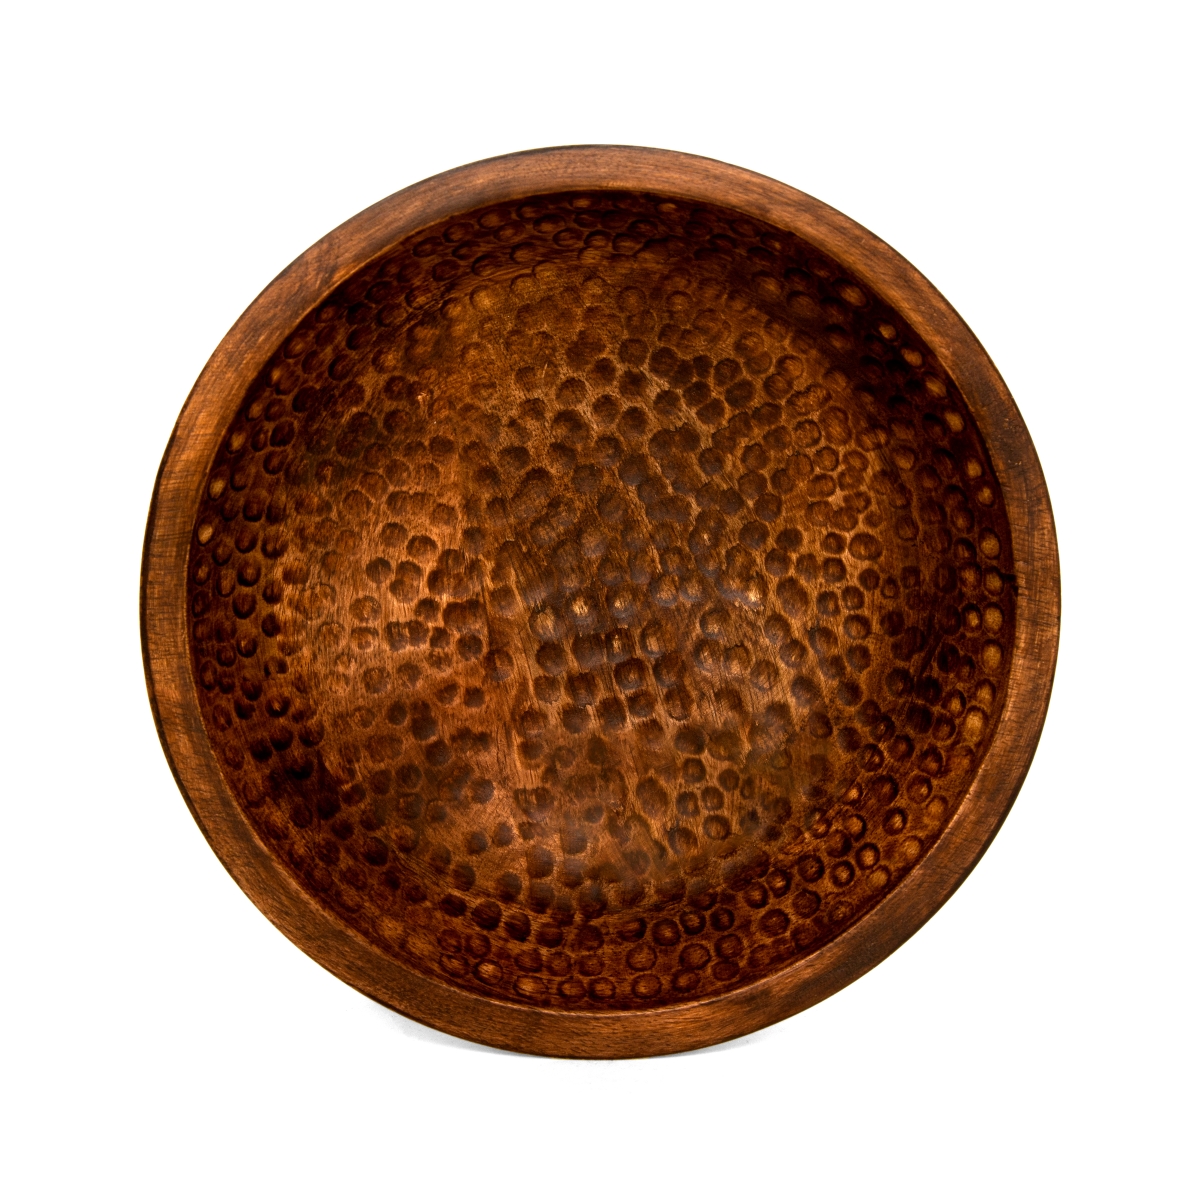 Picture of Heritage Lace HR-003 8 x 2 in. Artisan Wood Round Bowl, Brown